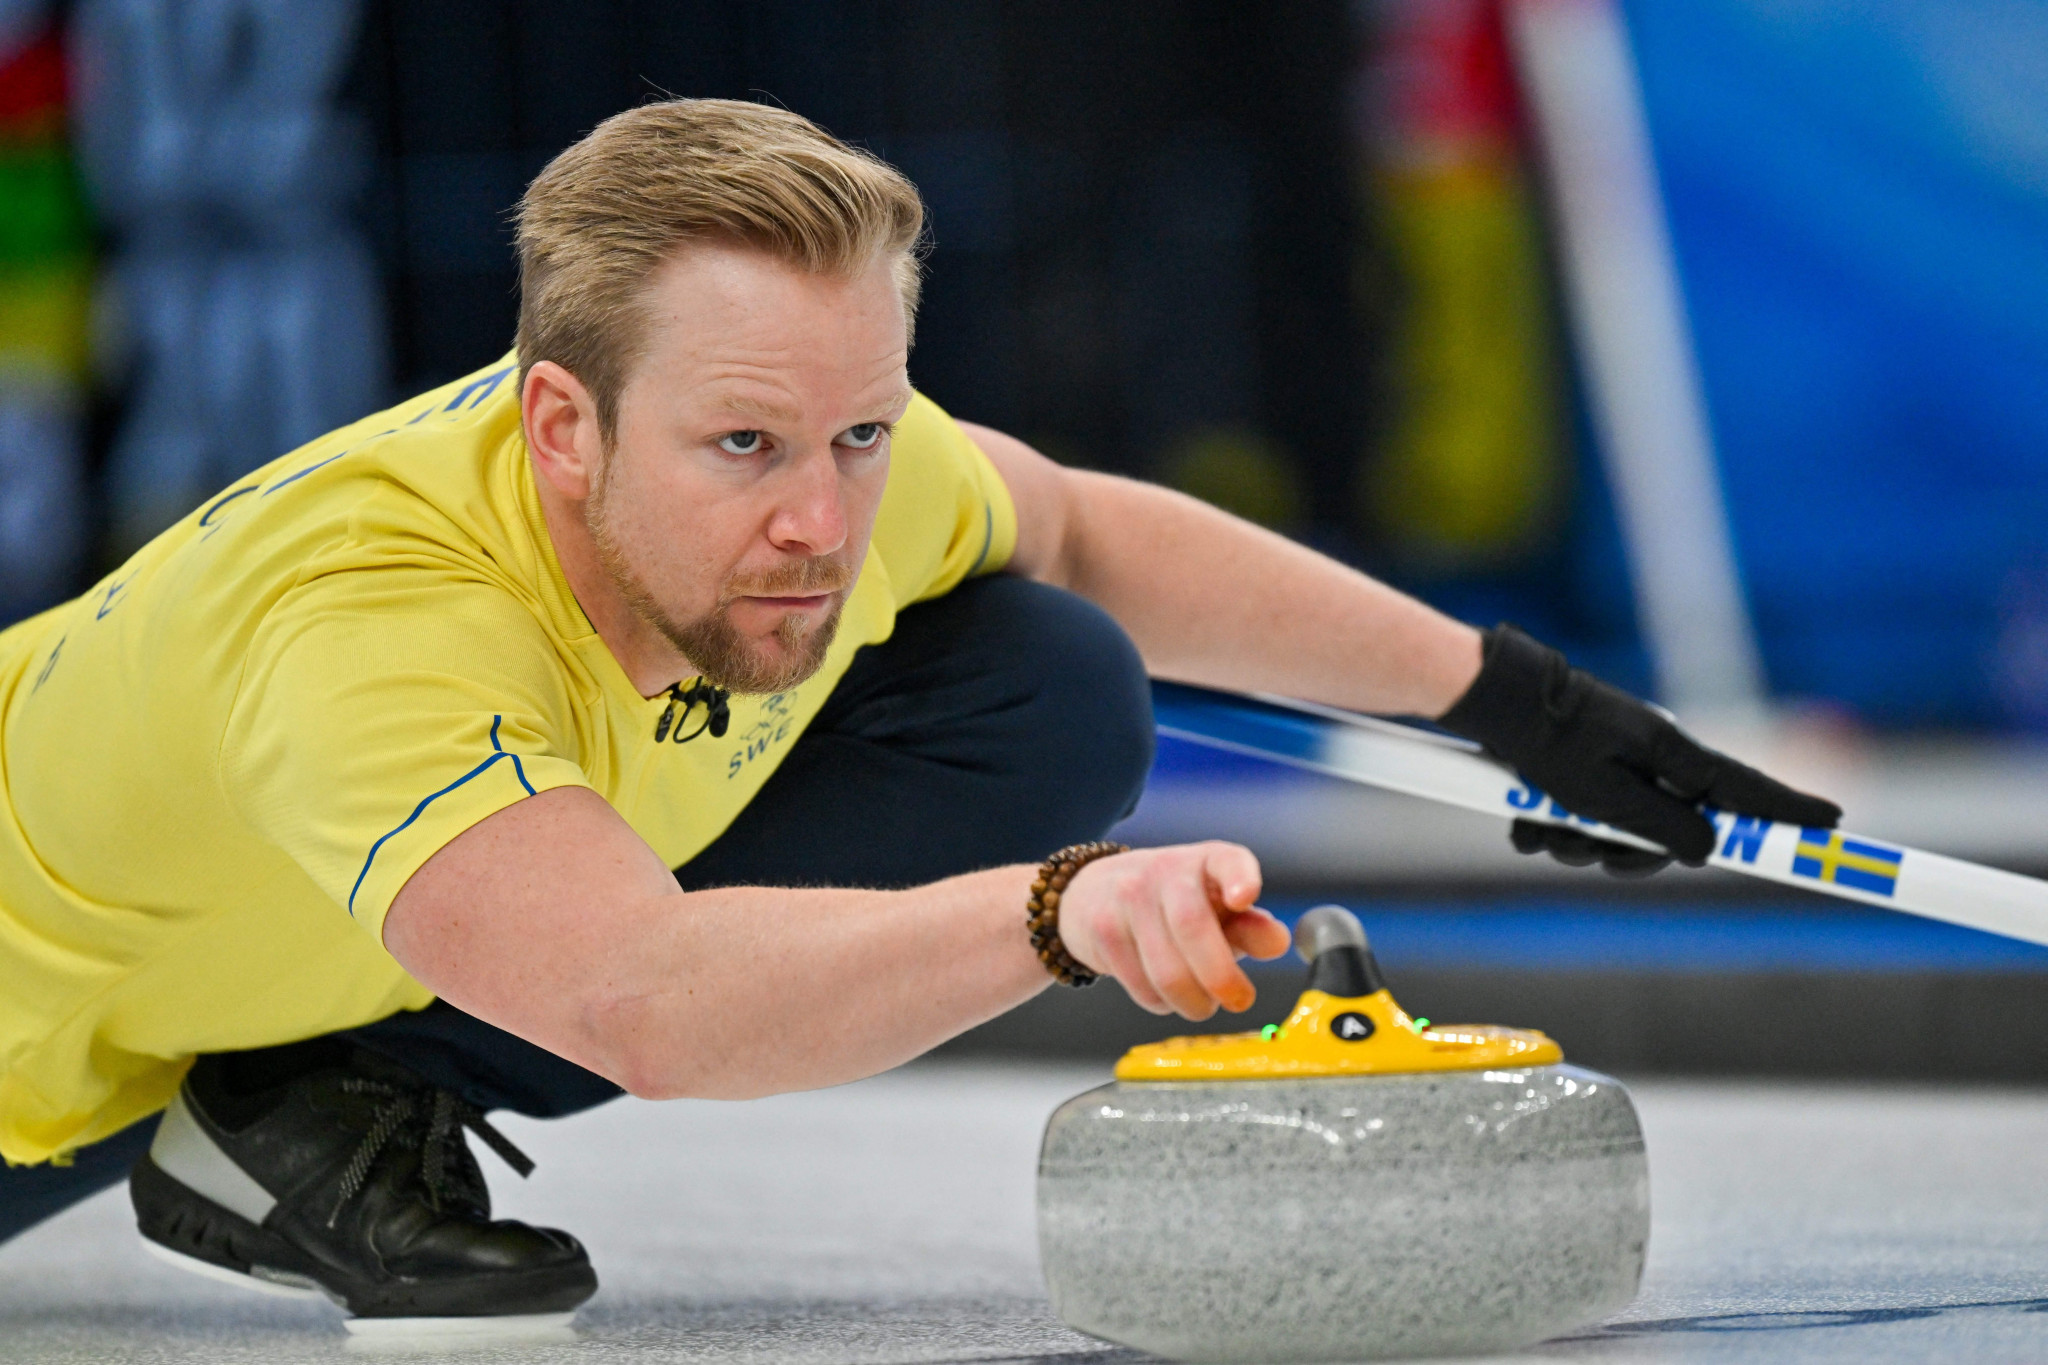 Sweden remain undefeated at World Men's Curling Championship